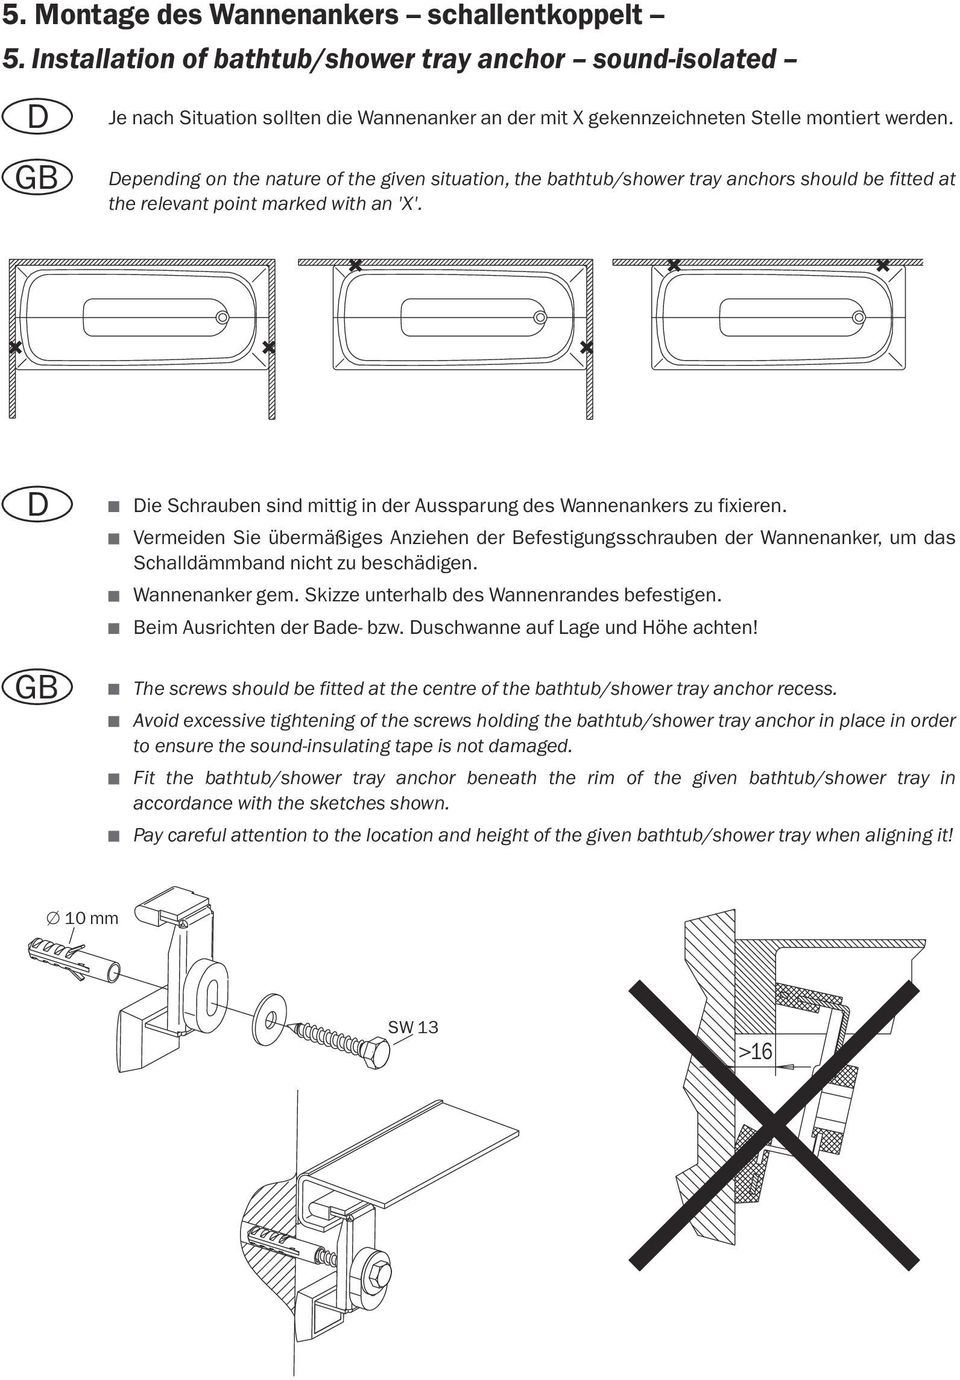 epending on the nature of the given situation, the bathtub/shower tray anchors should be fitted at the relevant point marked with an 'X'.